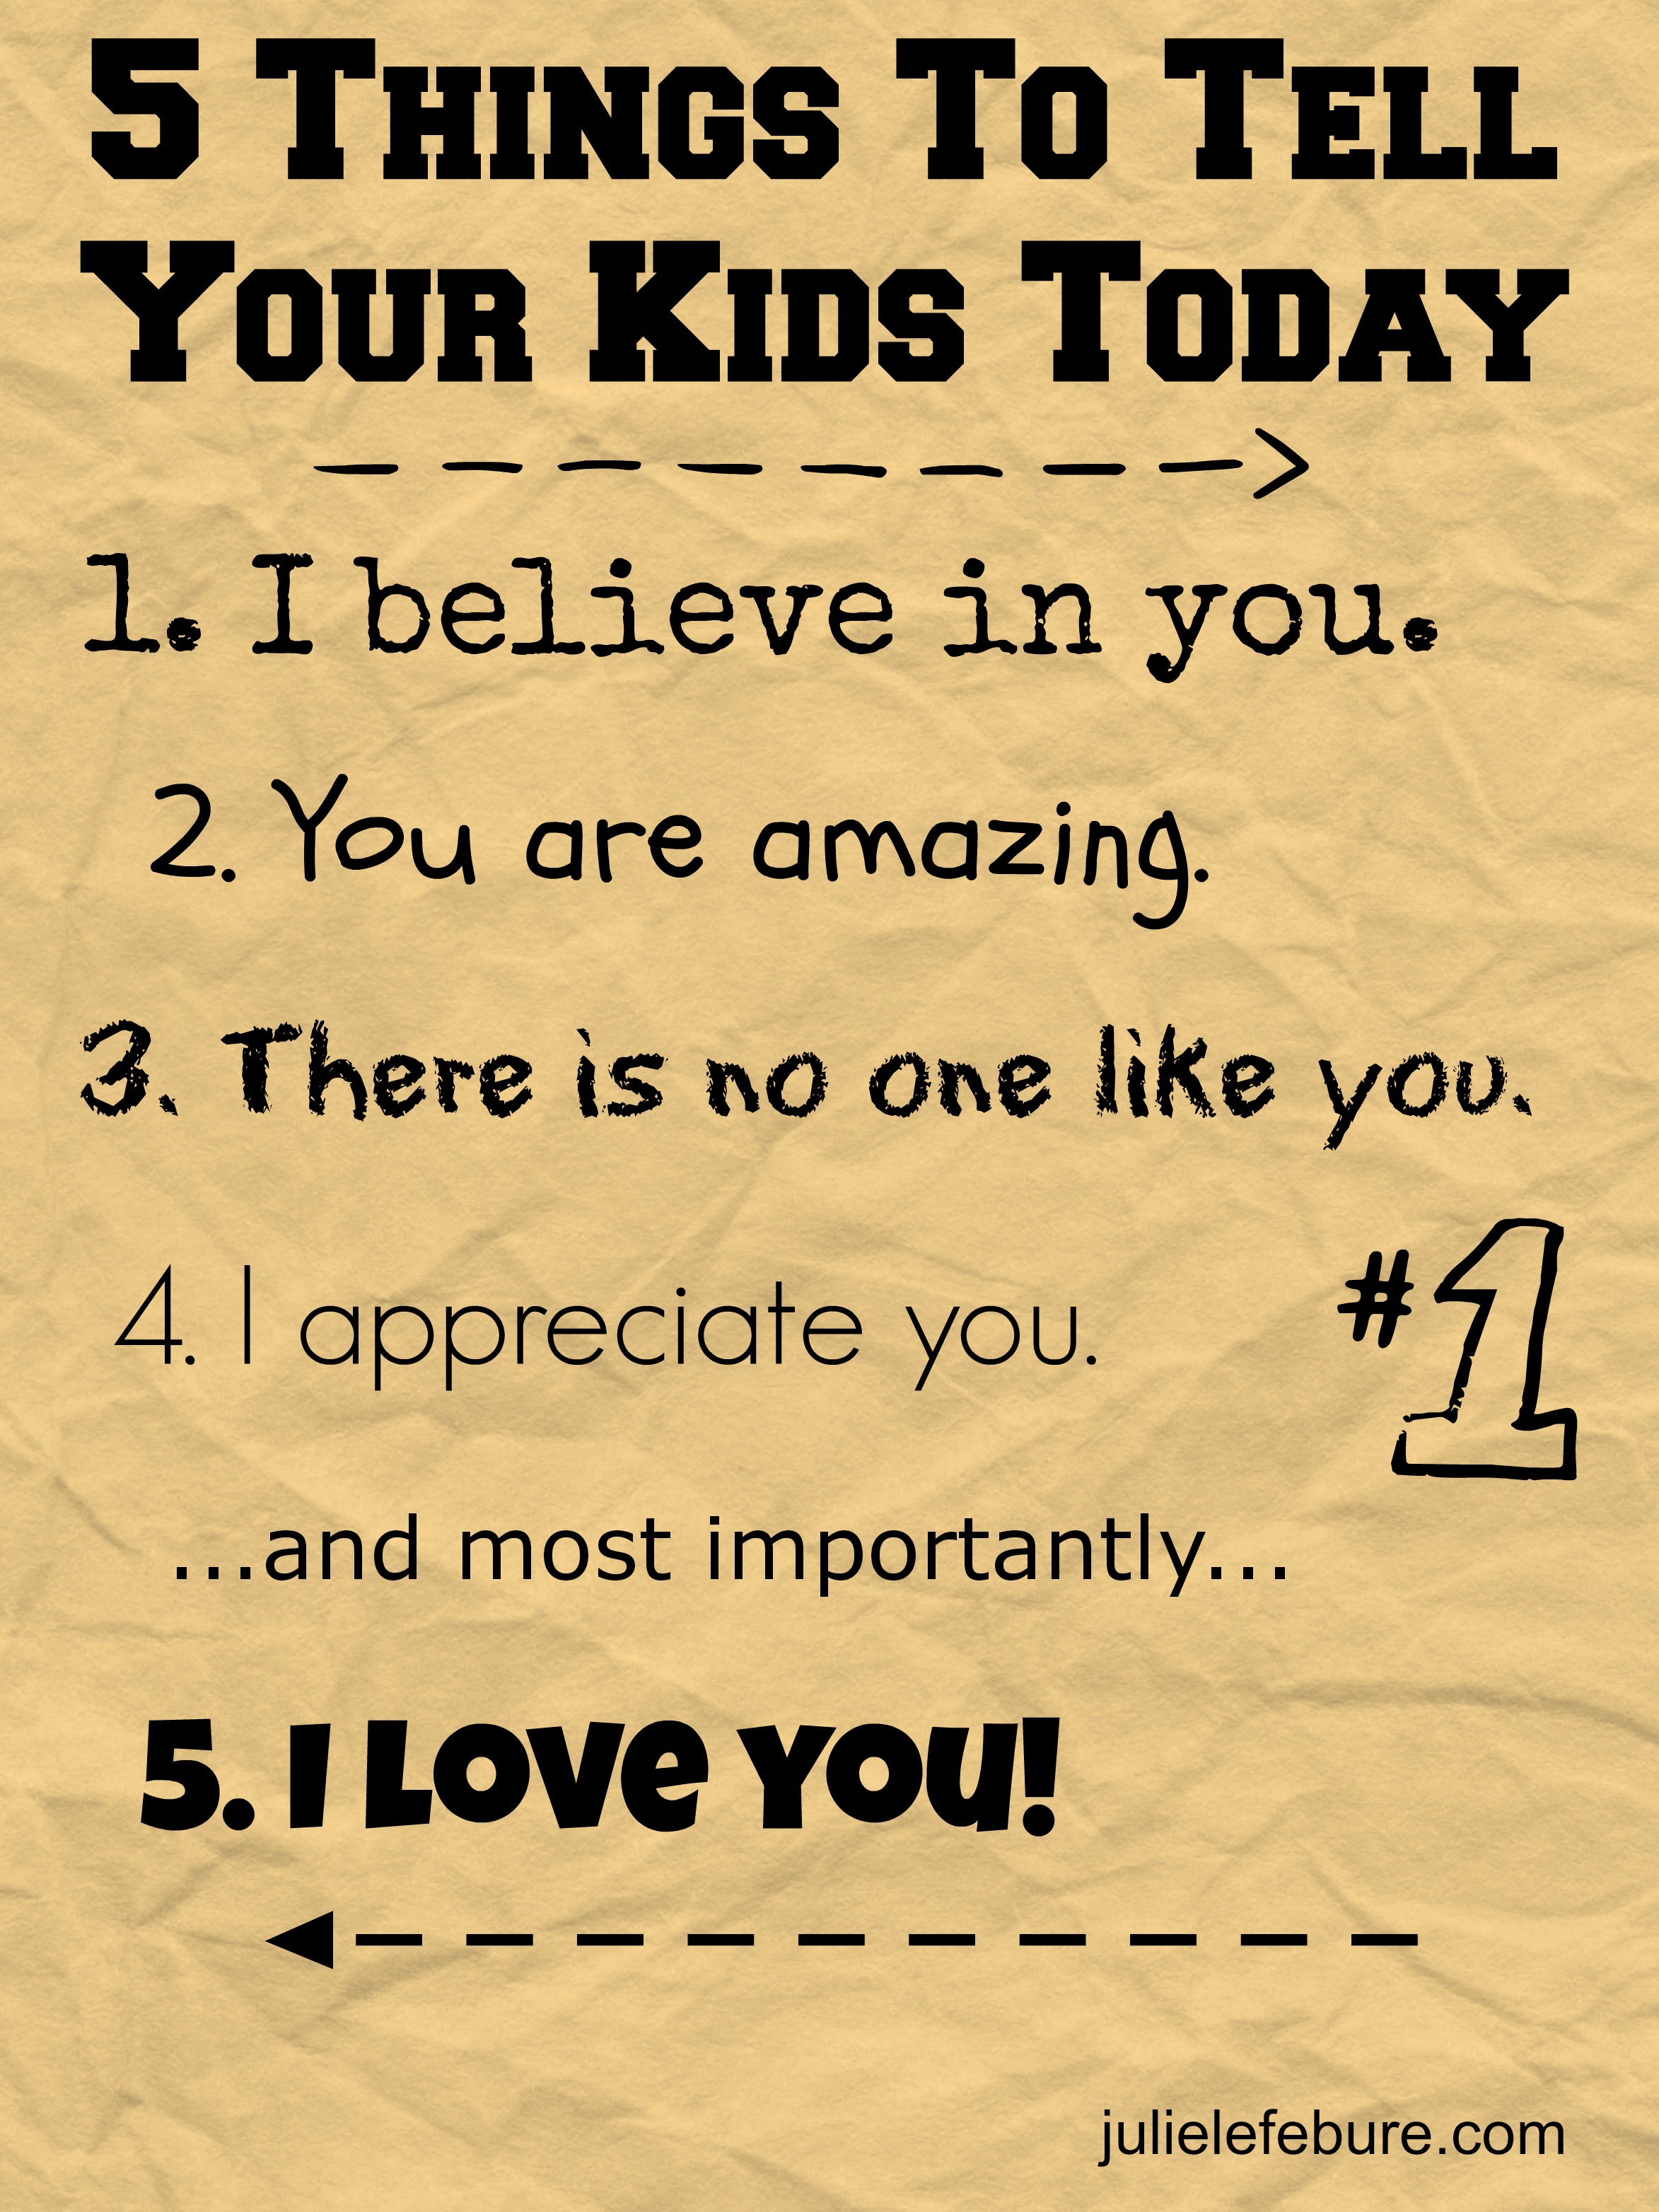 5 Things to Tell Your Kids Today